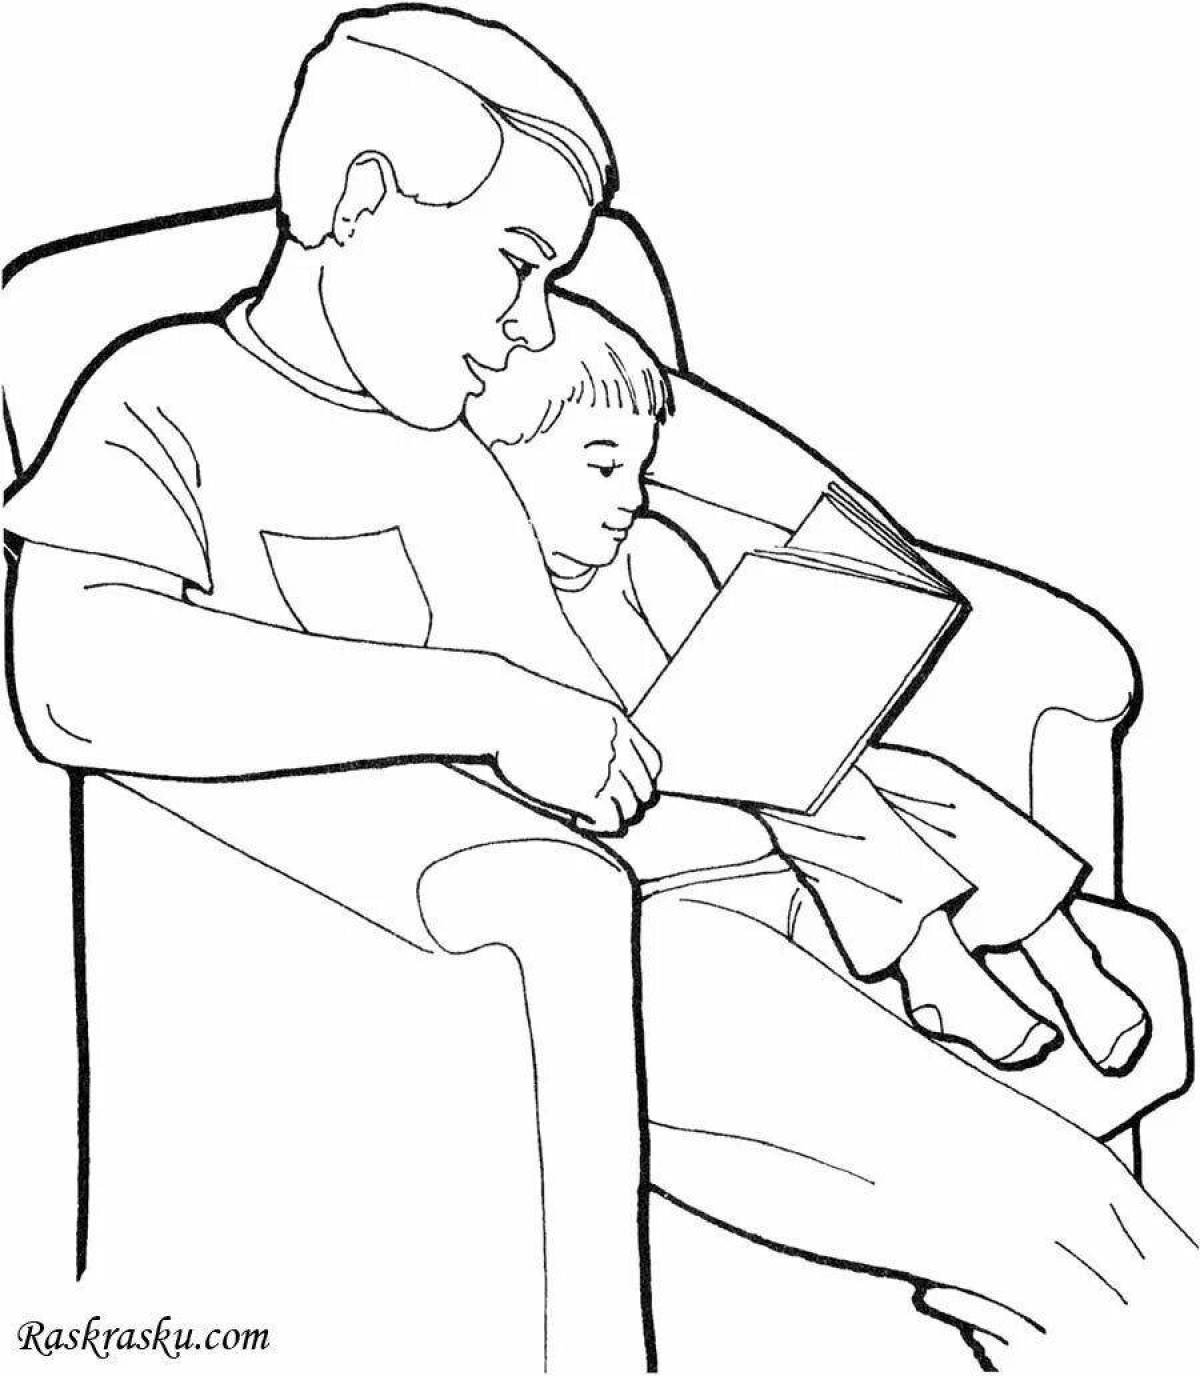 Excited son and dad coloring page